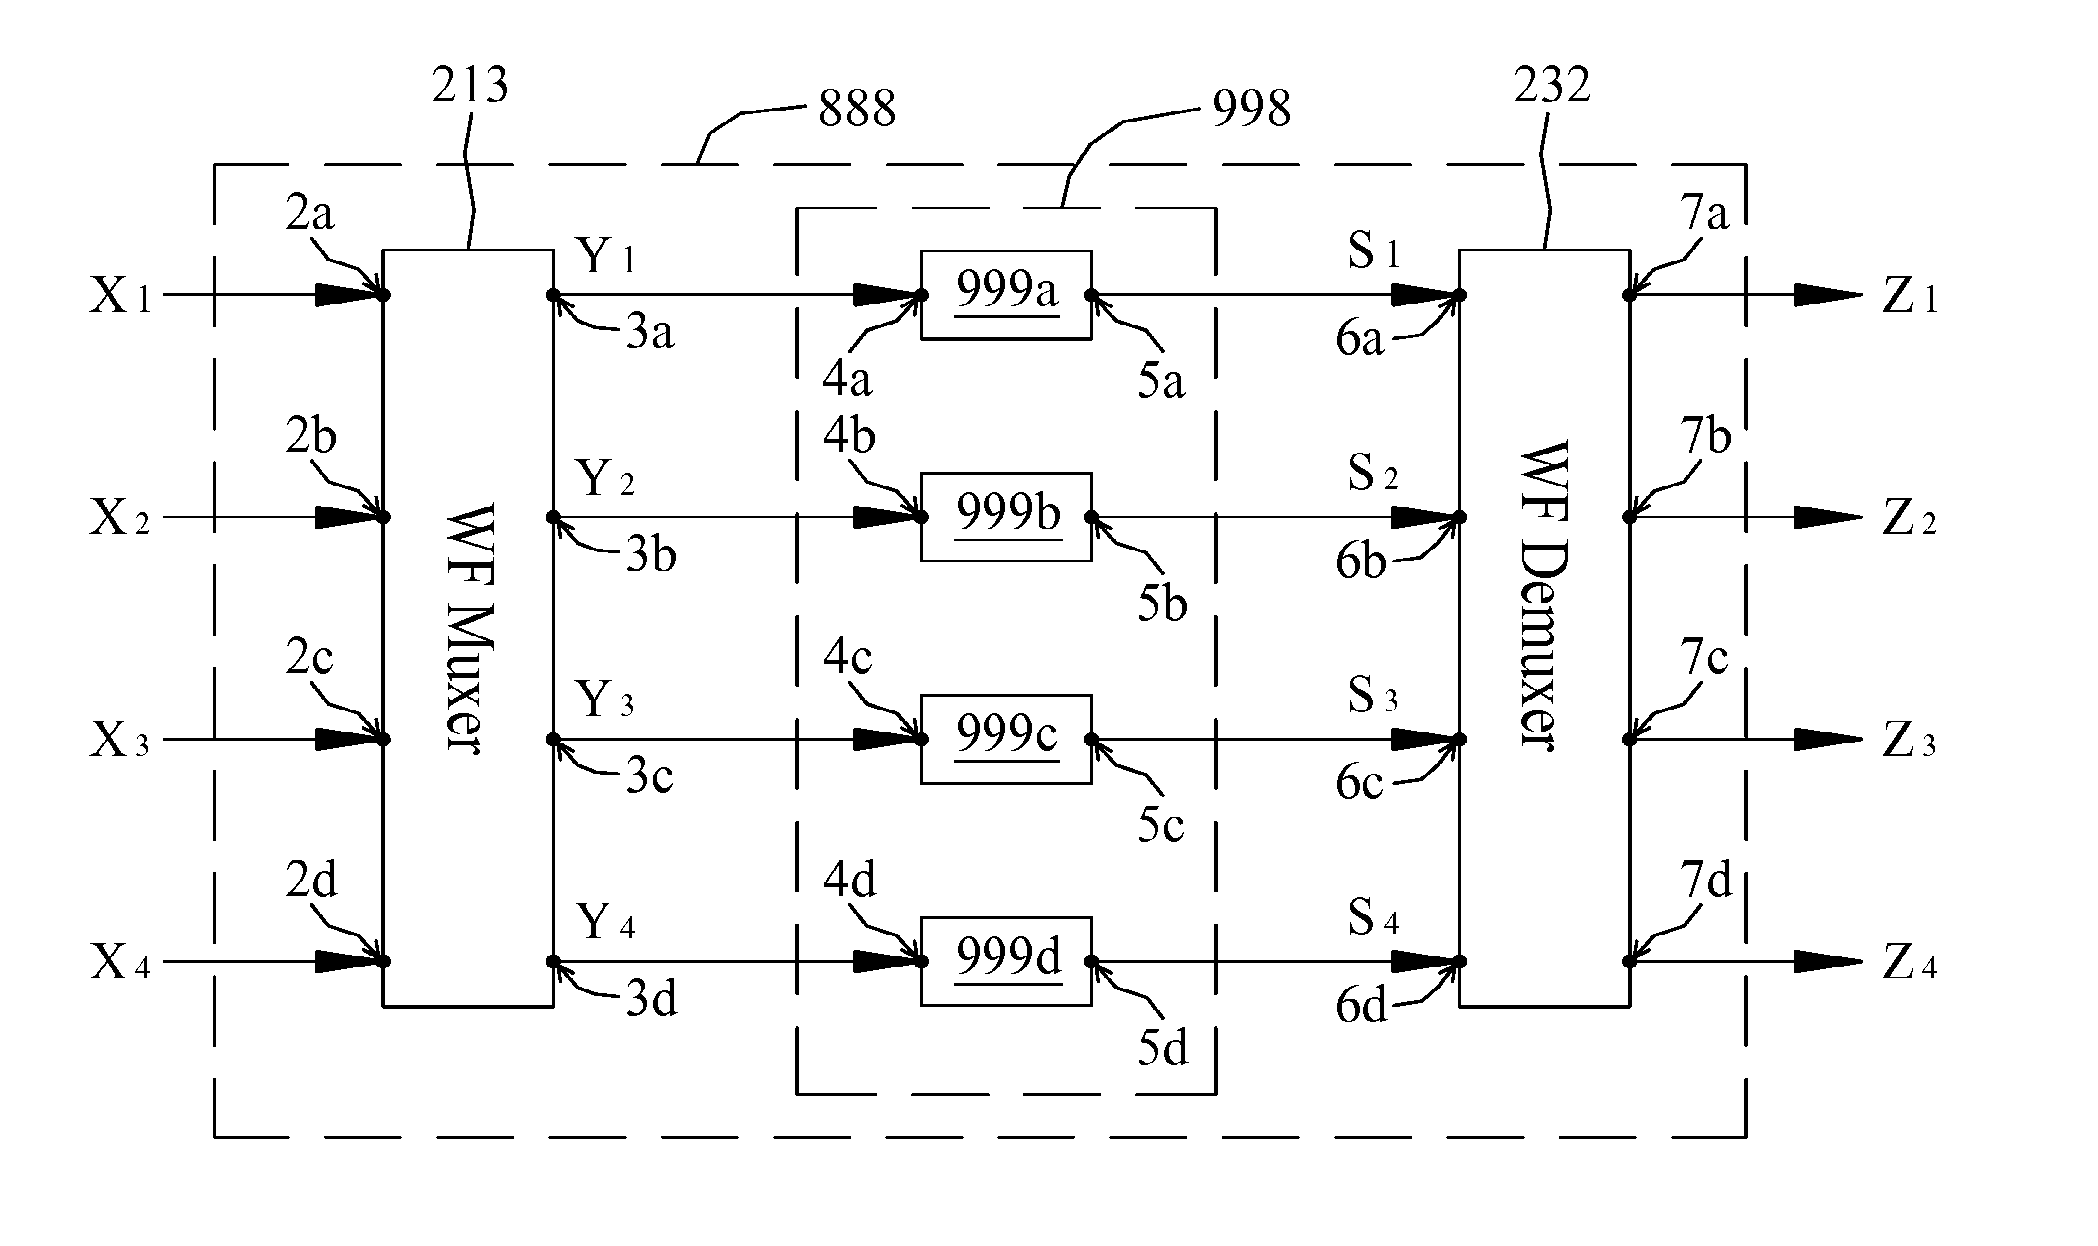 System for processing data streams